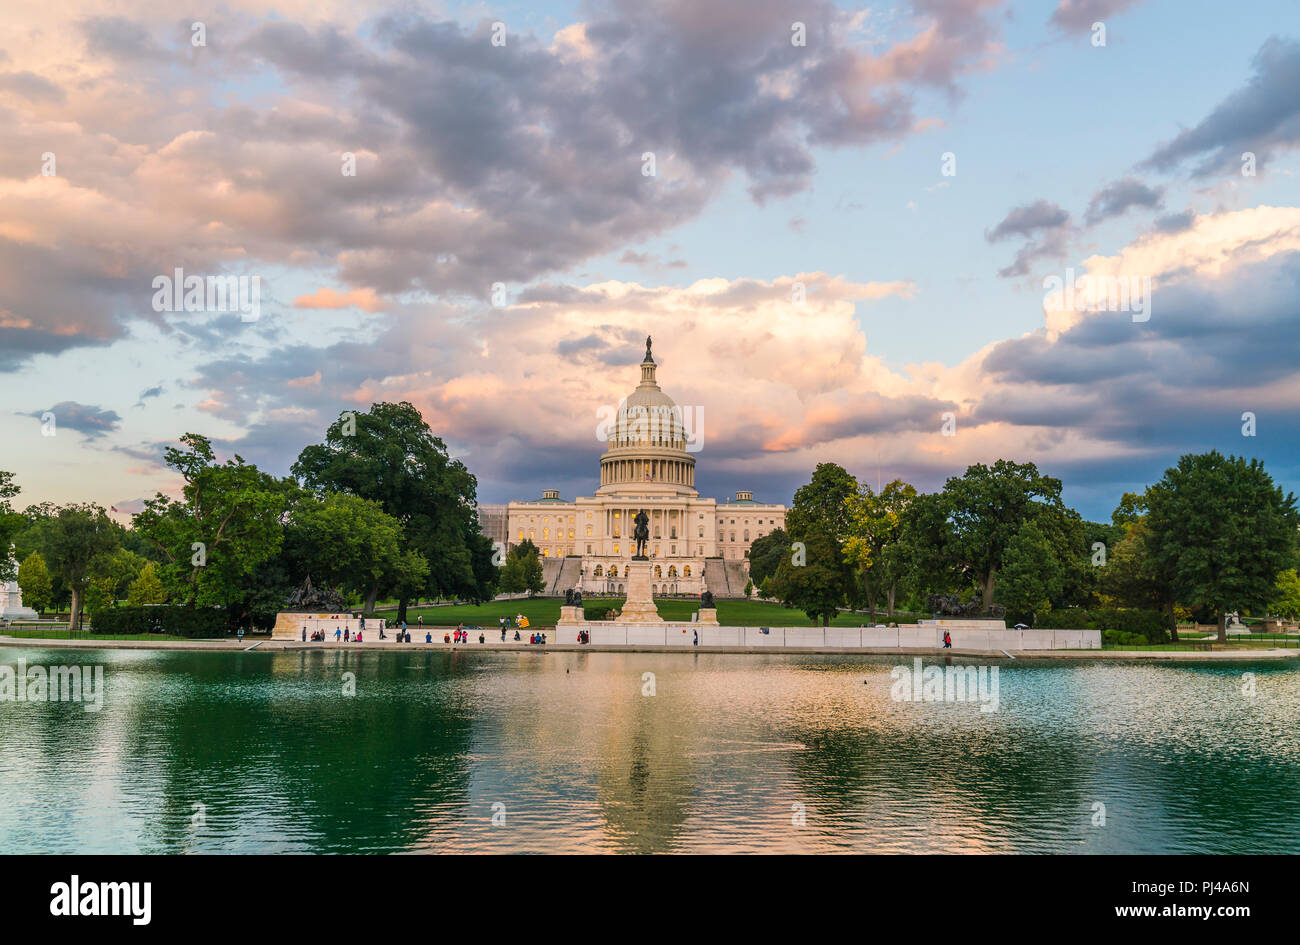 The United States Capitol building at sunset wirh reflection in water. Stock Photo